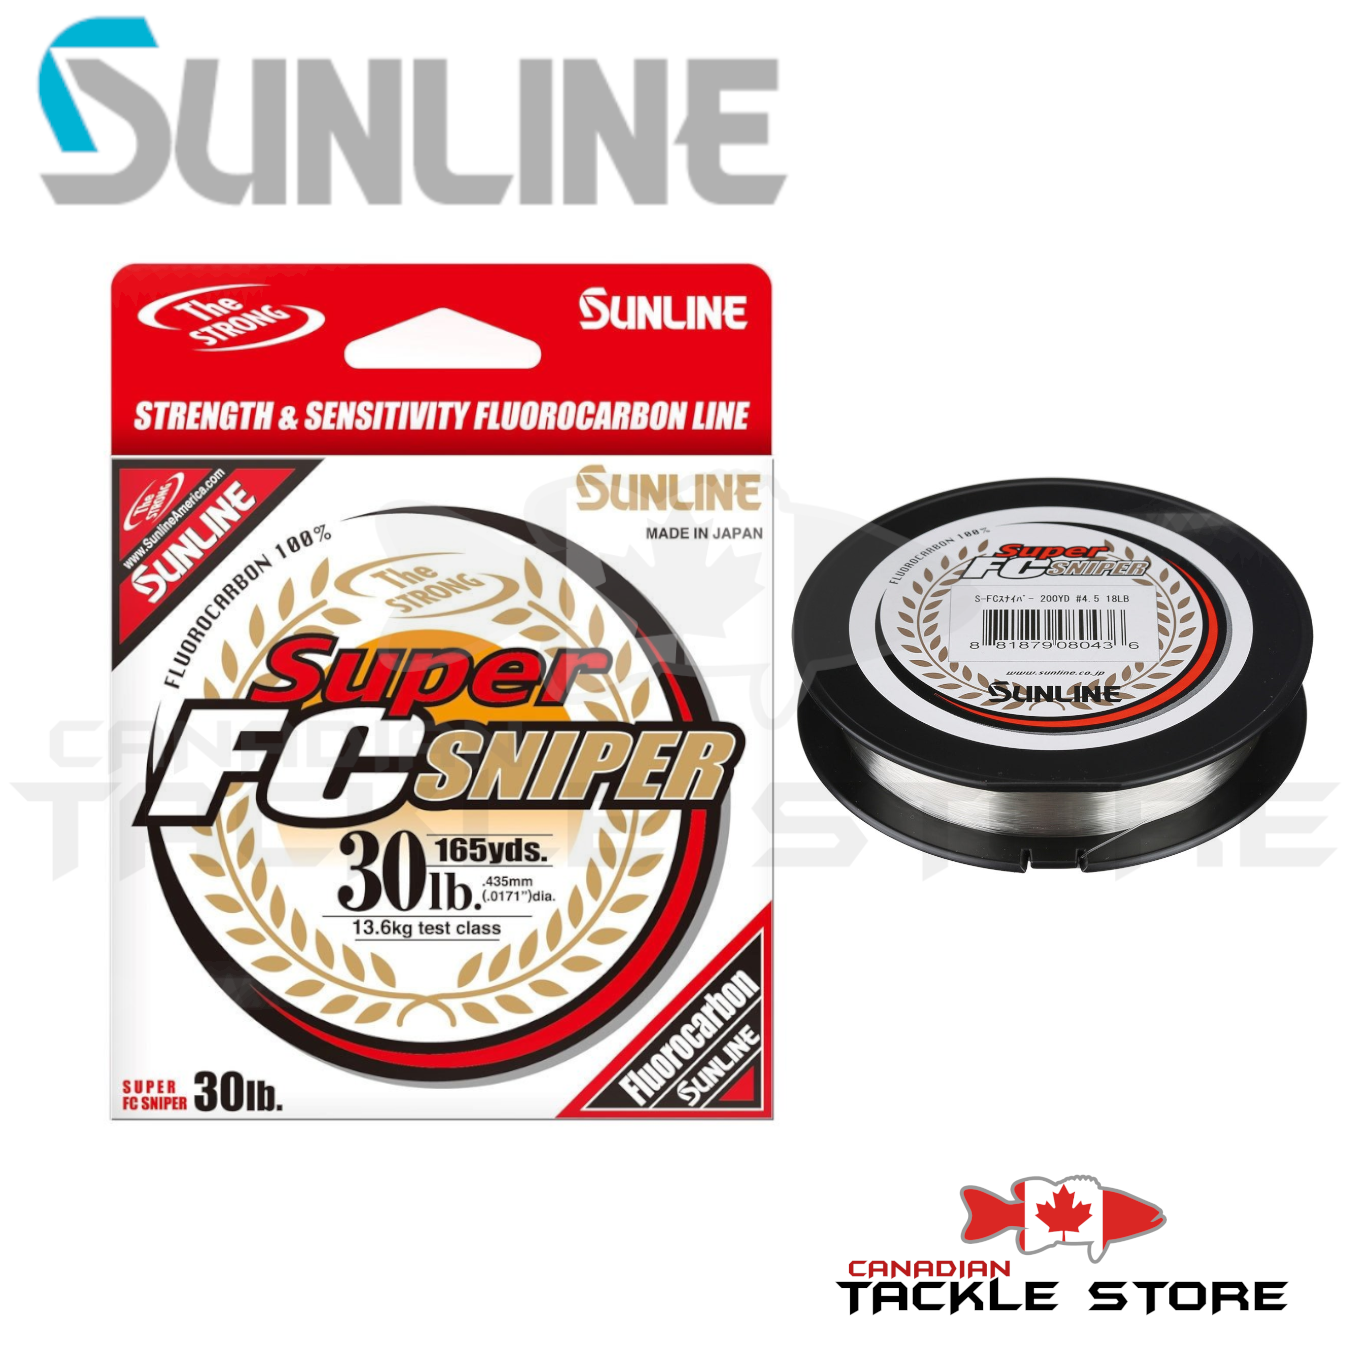 Vicious Fishing 800 Yards/Clear FLB-12 100% Fluorocarbon Line 12lbs